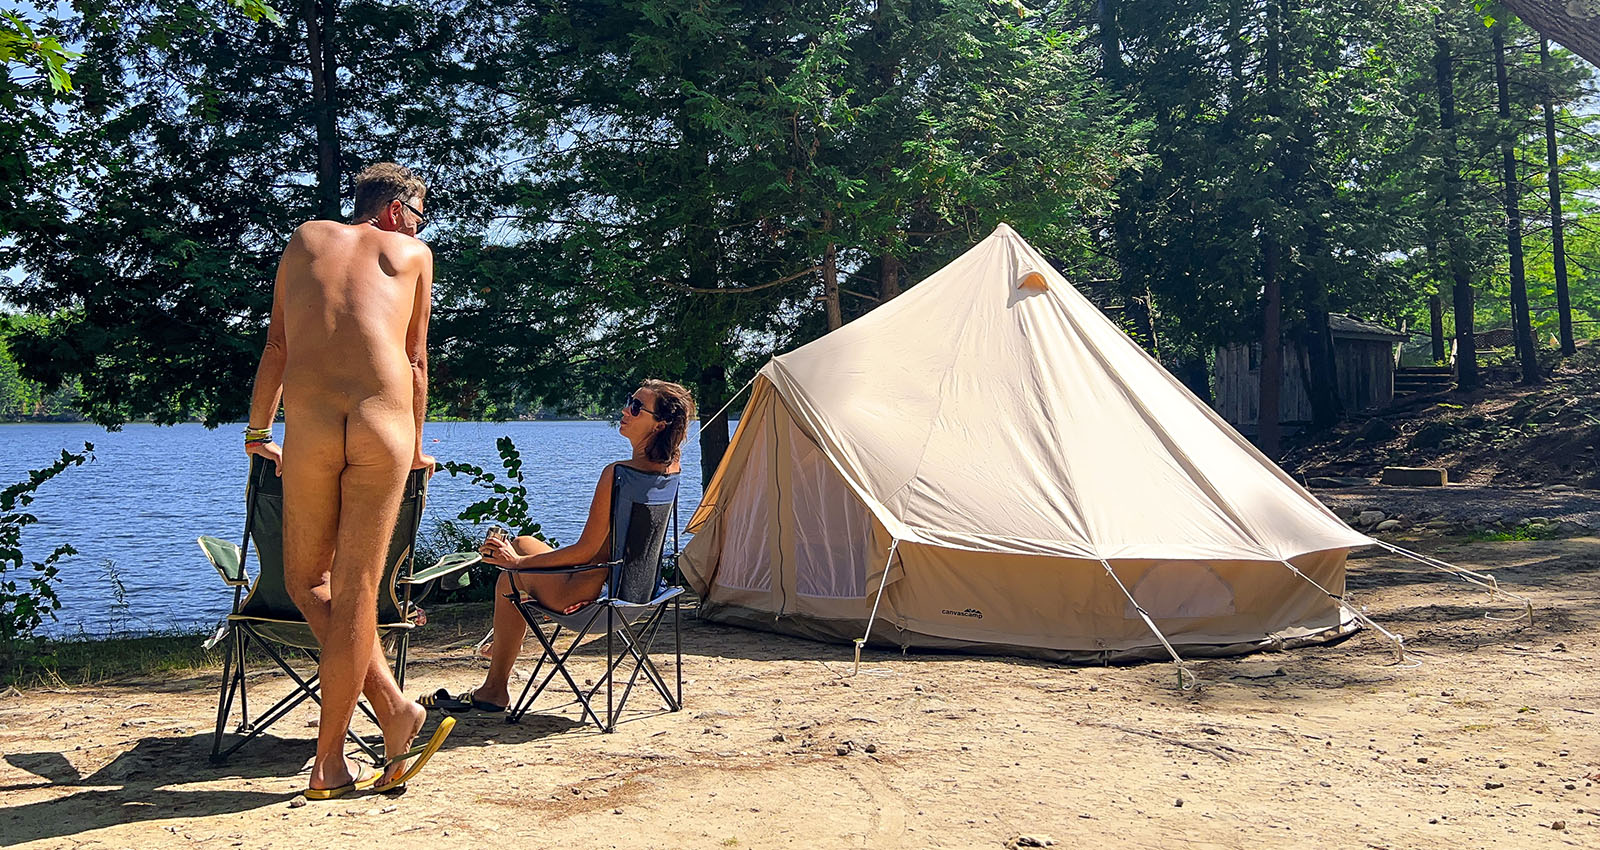 Nude in tent